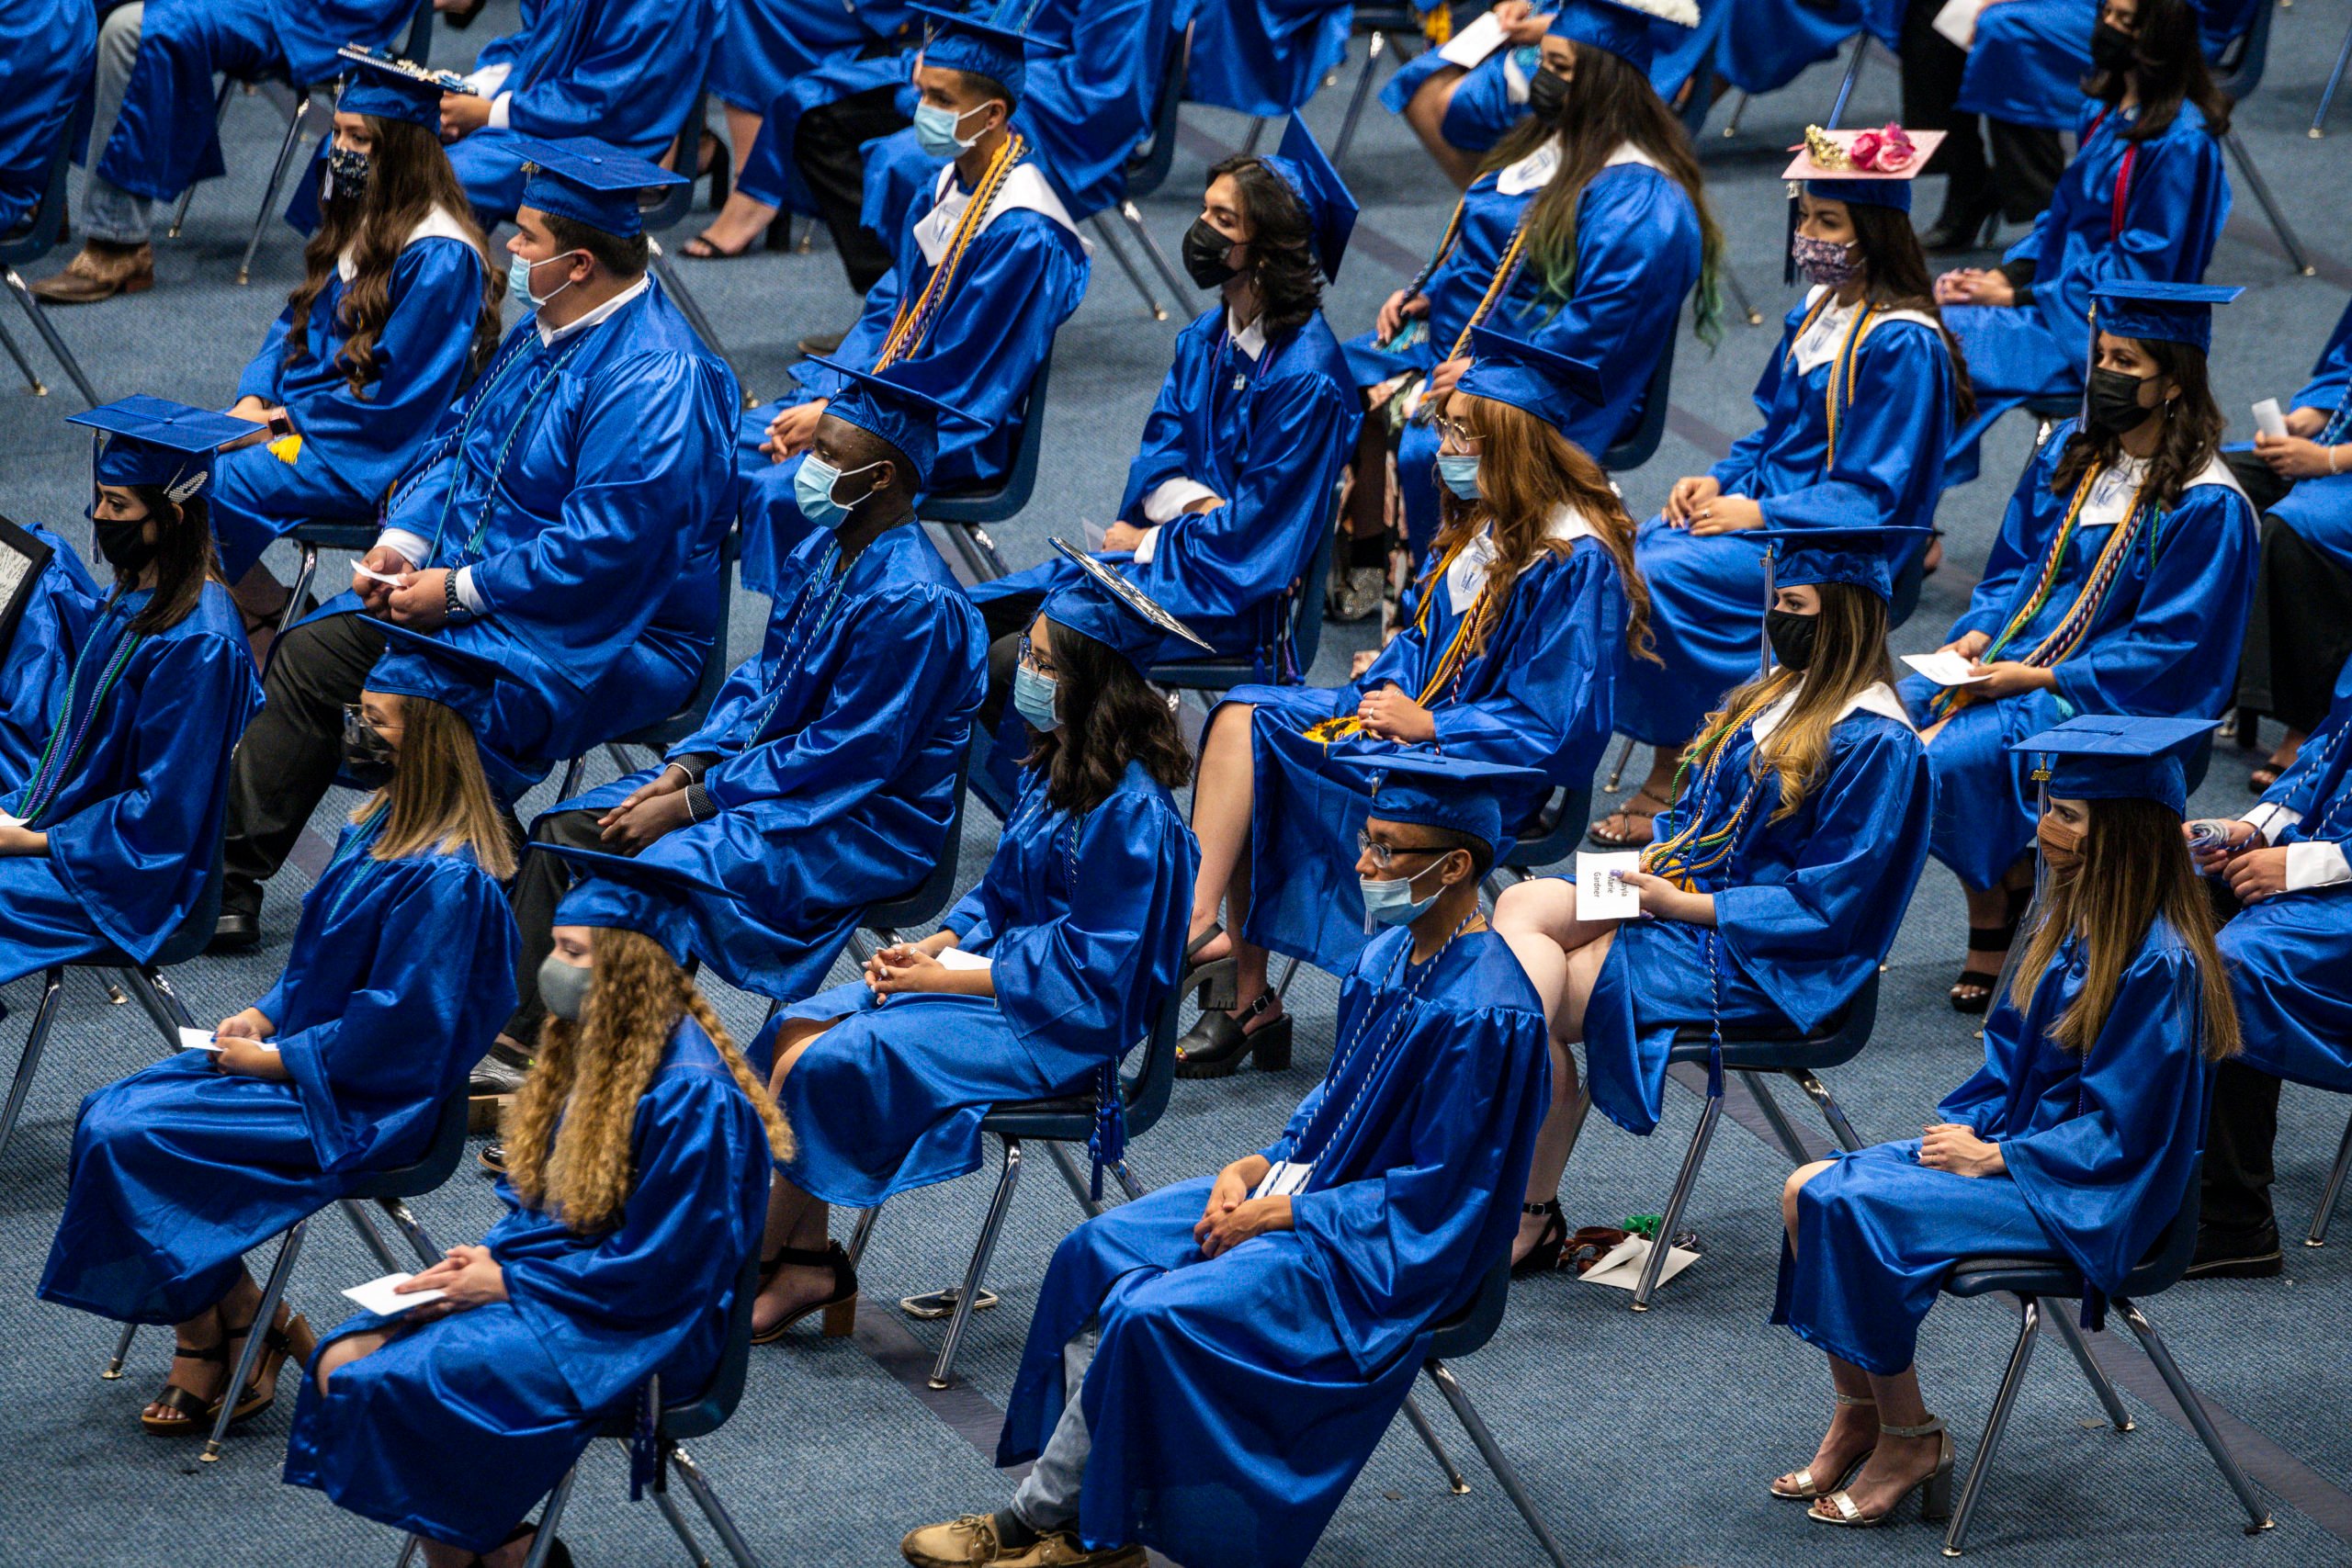 Students in a seeming ocean of blue gowns and caps listen, seated in rows of plastic chairs at a graduation ceremony.